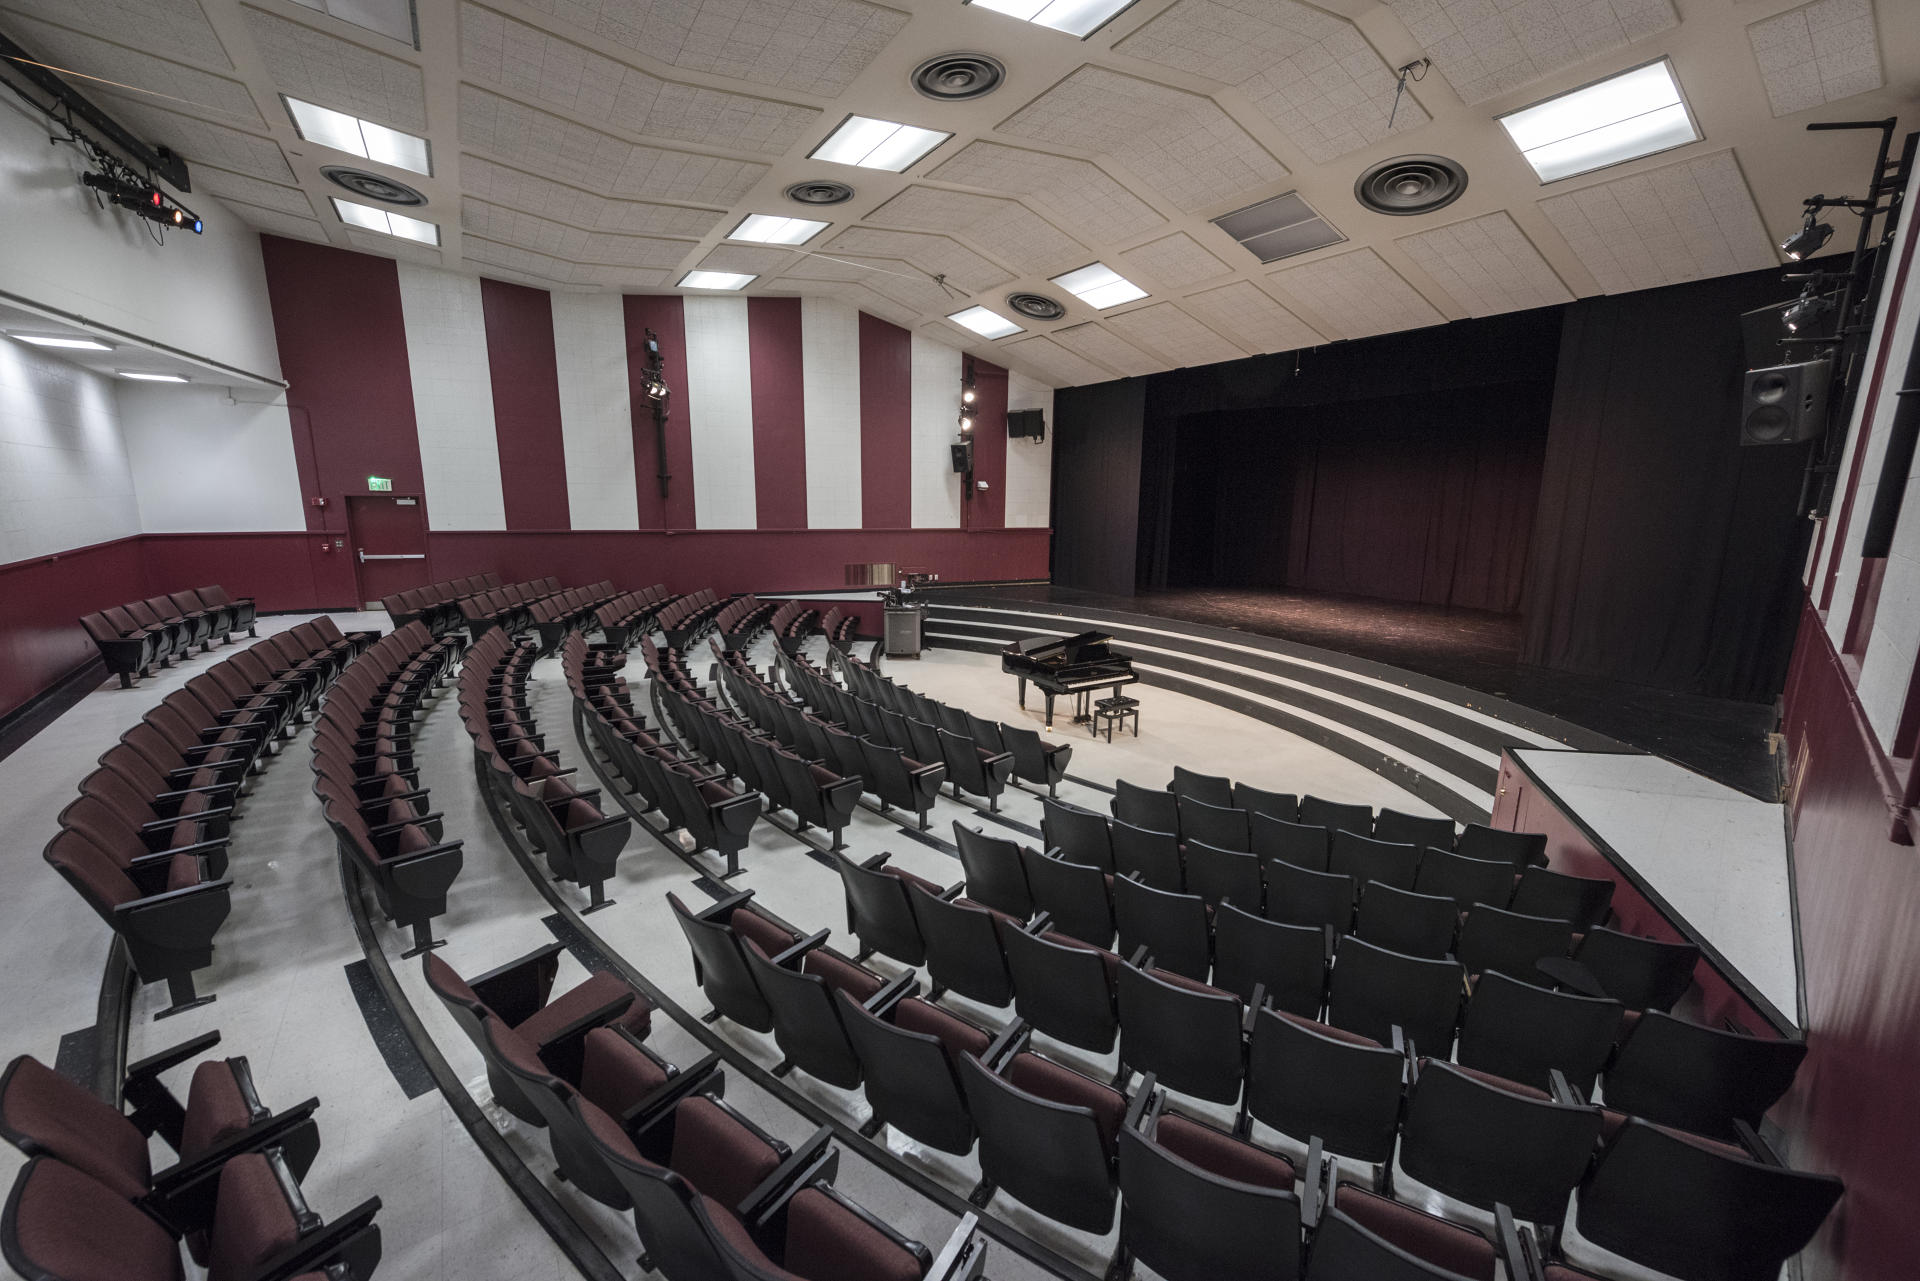 The Ruth Rowland Taylor Recital Hall features 218 seats with a red and white decor